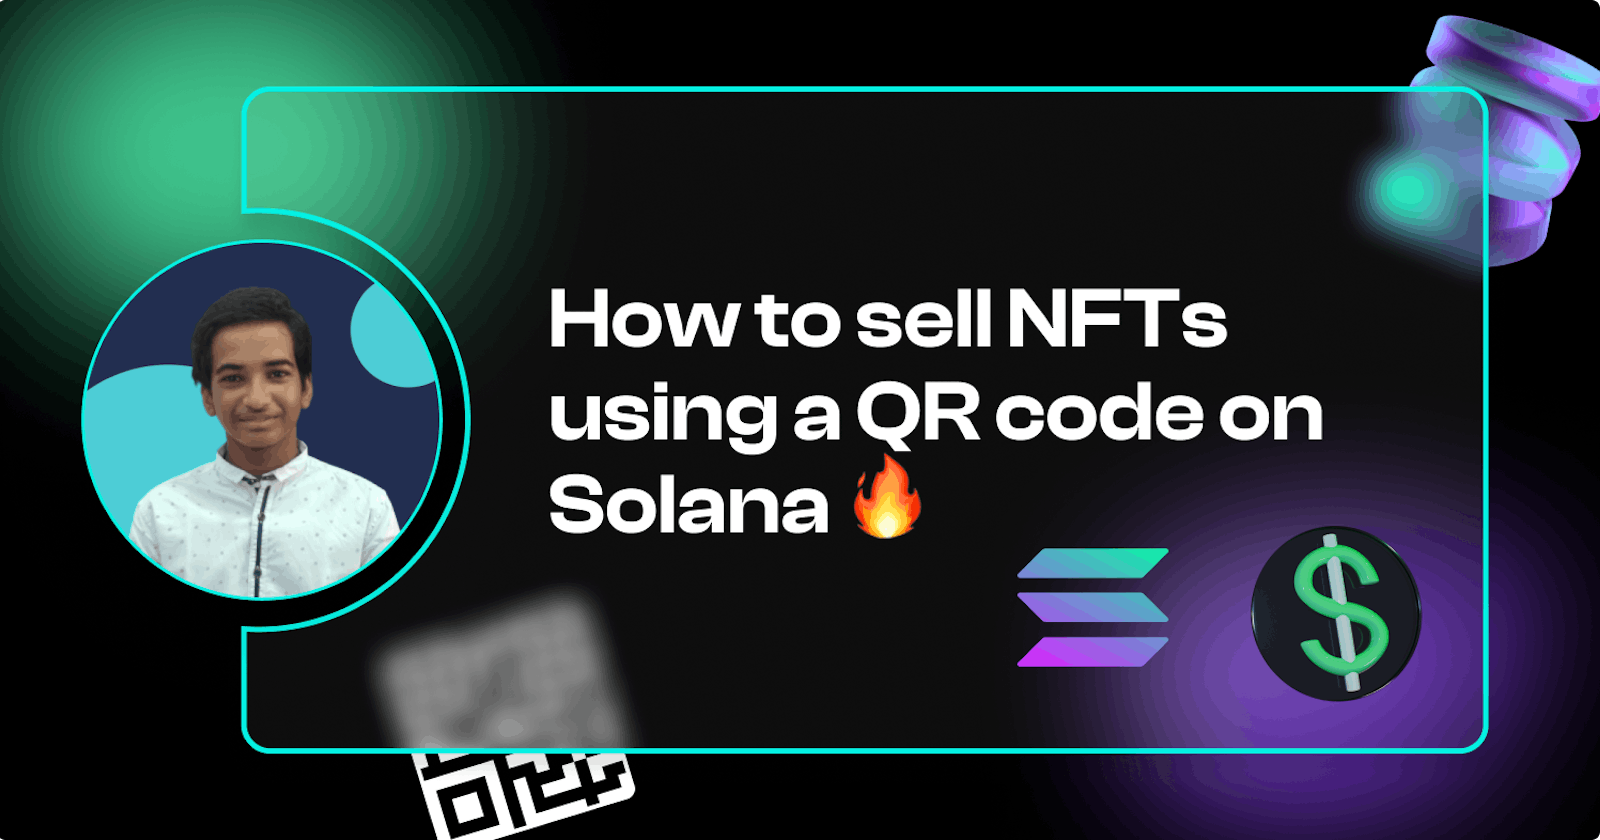 How to sell NFTs using a QR code on Solana 🔥